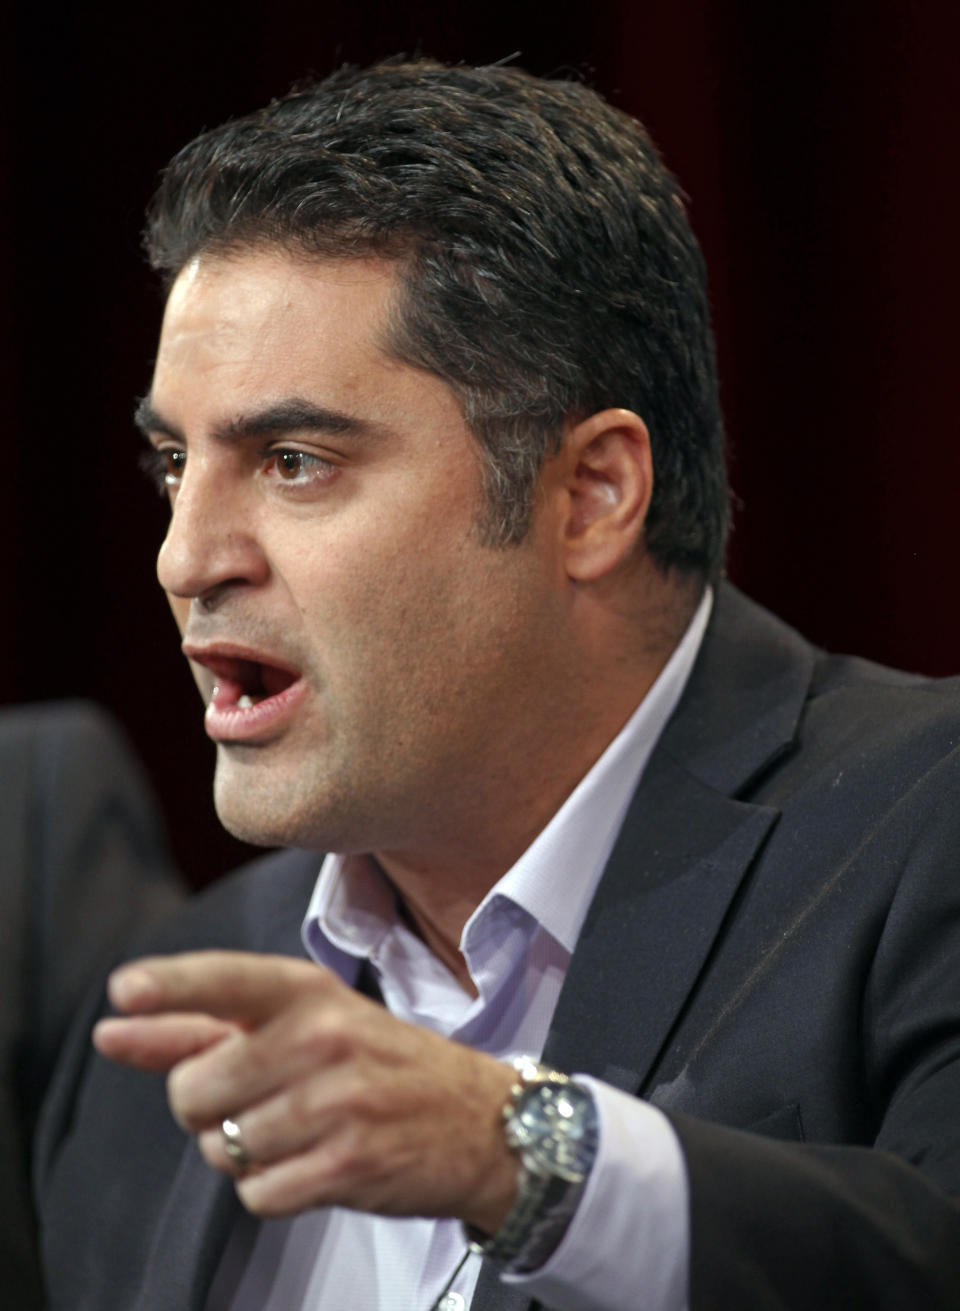 FILE - Cenk Uygur, host of the television show "The Young Turks with Cenk Uygur," speaks at the Television Critics Association Winter Press Tour in Pasadena, Calif., Jan. 13, 2012. On Monday, Dec. 4, 2023, Arkansas election officials said online news personality Uygur, who was born in Turkey, can't appear on the state's Democratic presidential primary ballot in 2024. (AP Photo/Danny Moloshok, File)